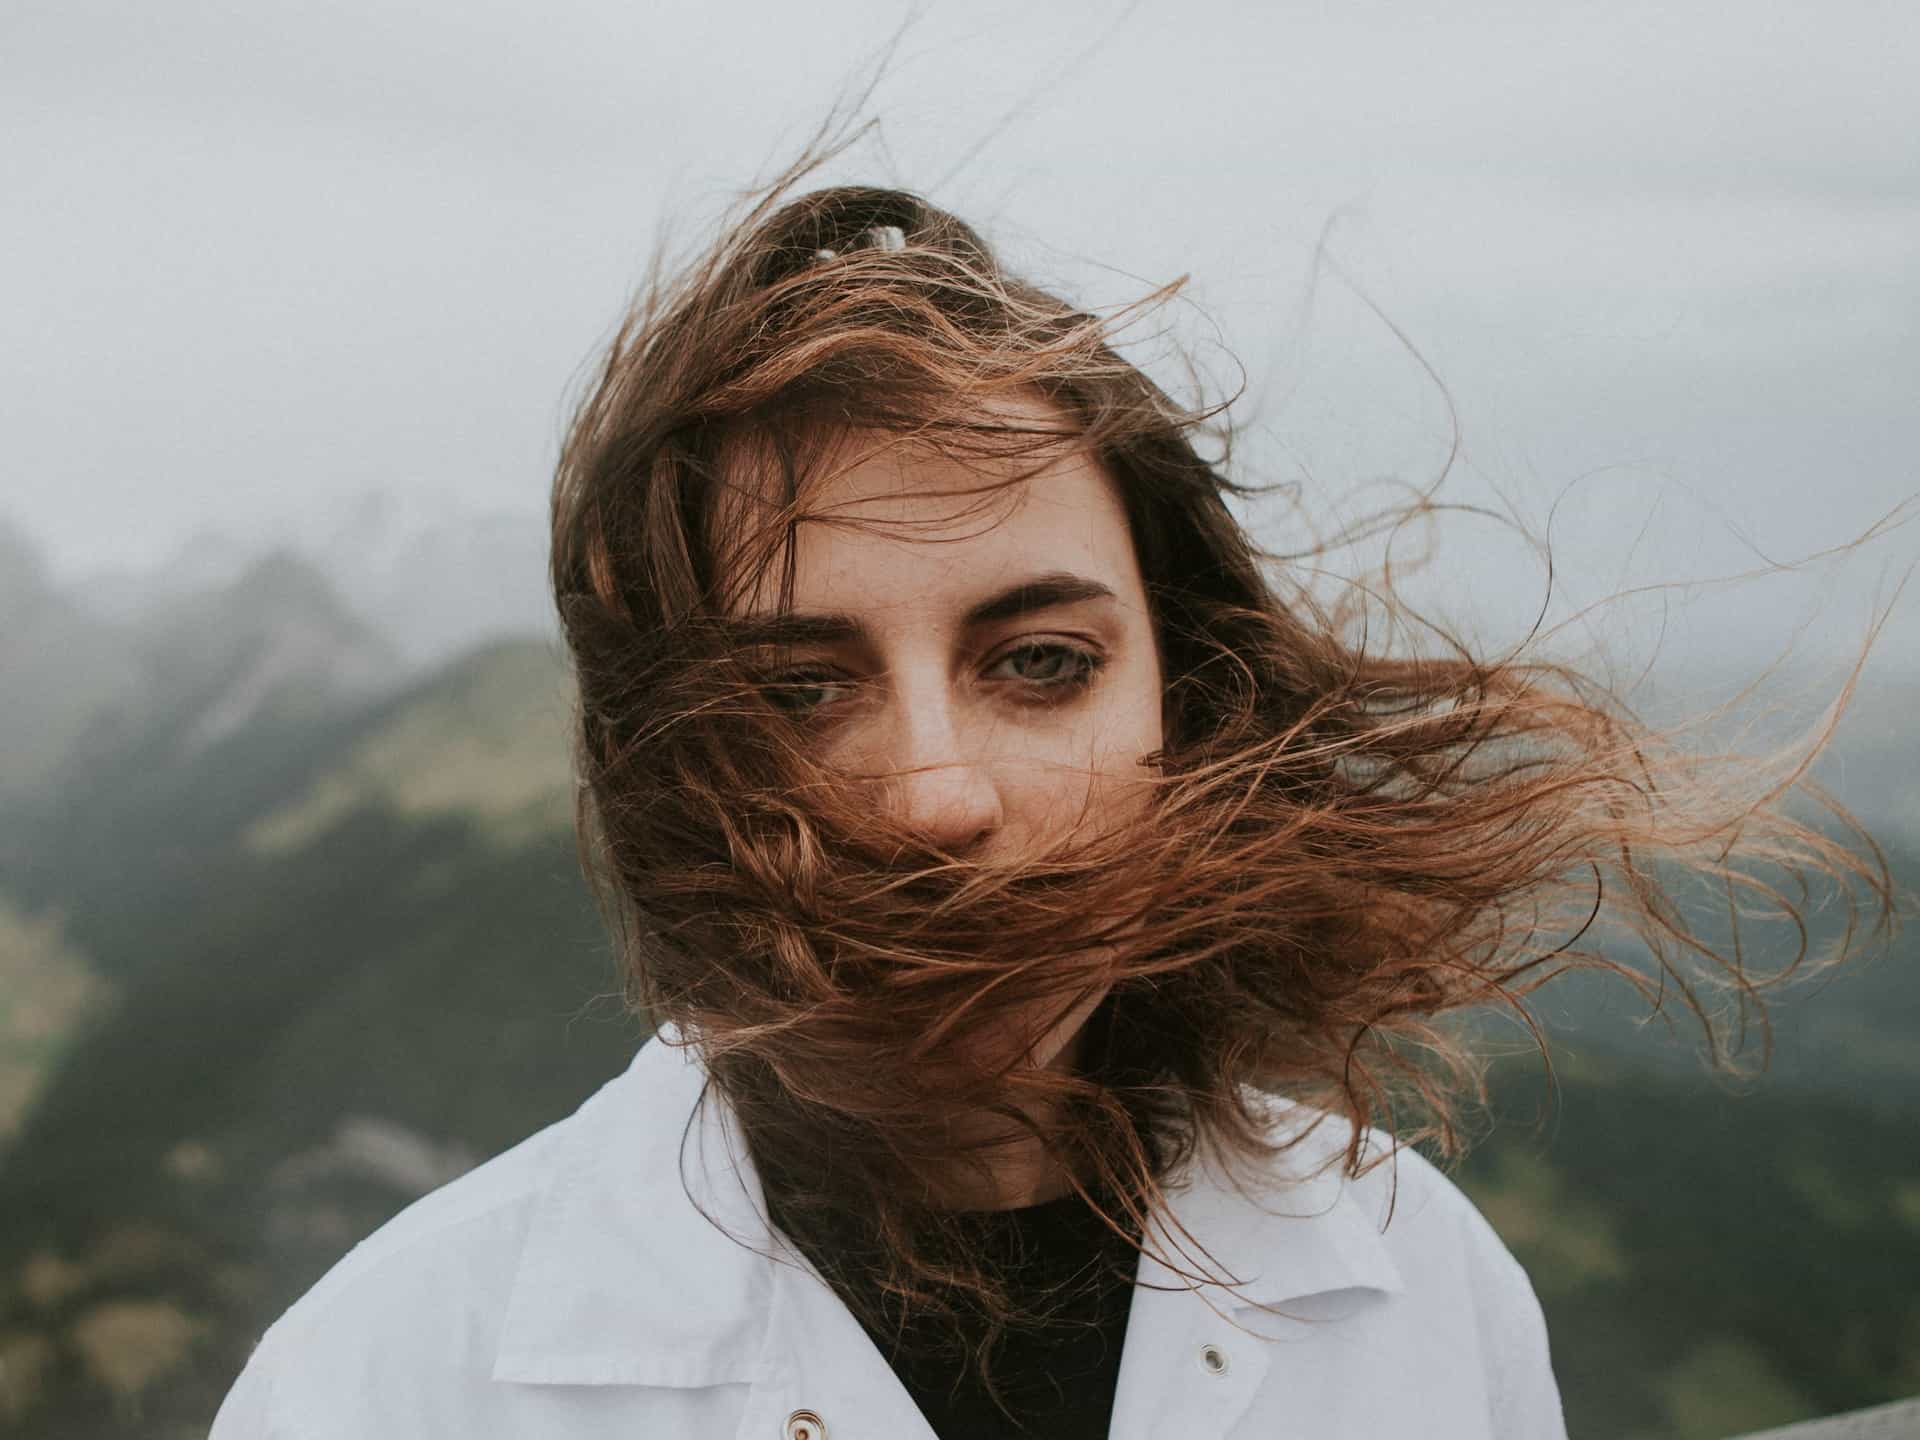 Person with blowing hair in wind